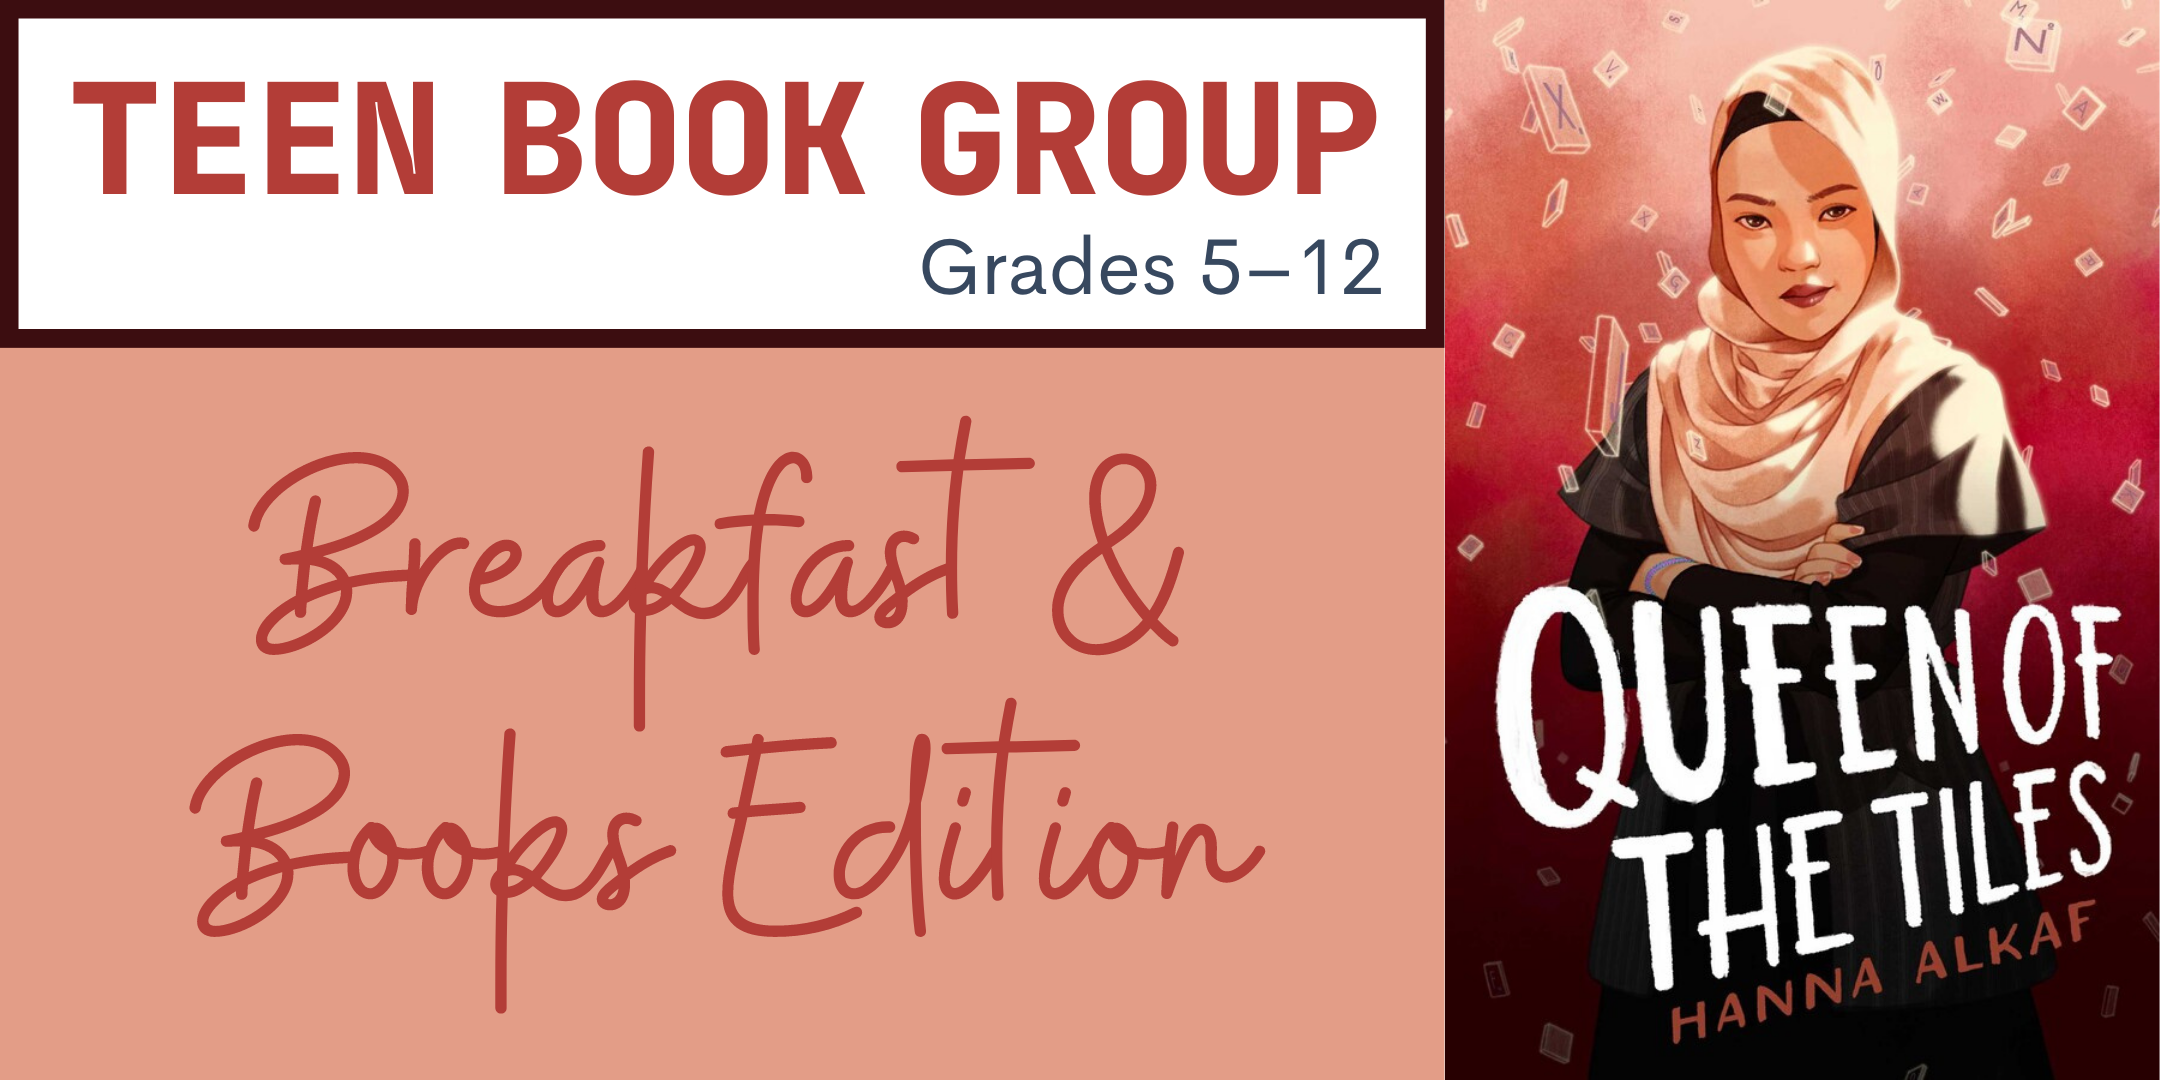 image of Teen Book Group for Grades 5–12 Breakfast and Books Edition by Hanna Alkaf with book cover of "Queen of the Tiles" by Hanna Alkaf 